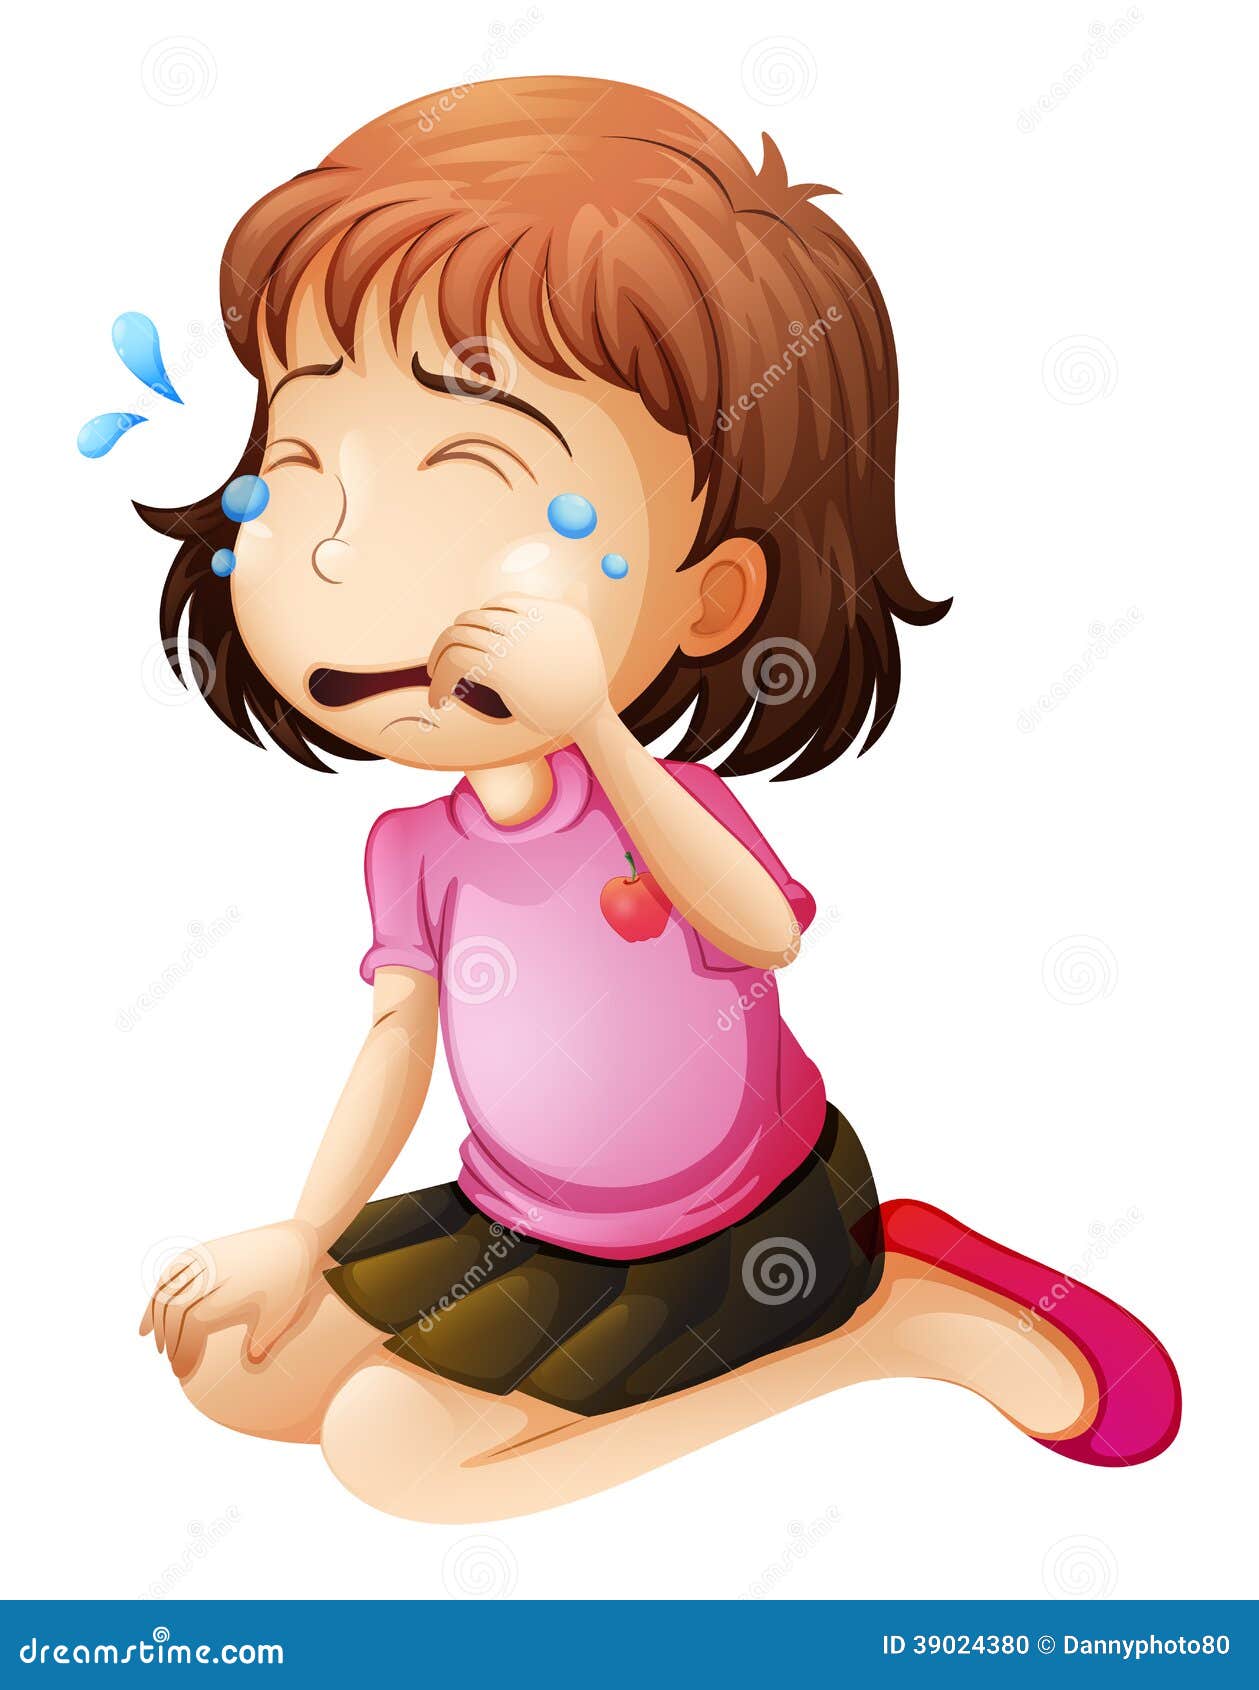 clipart of little girl crying - photo #1